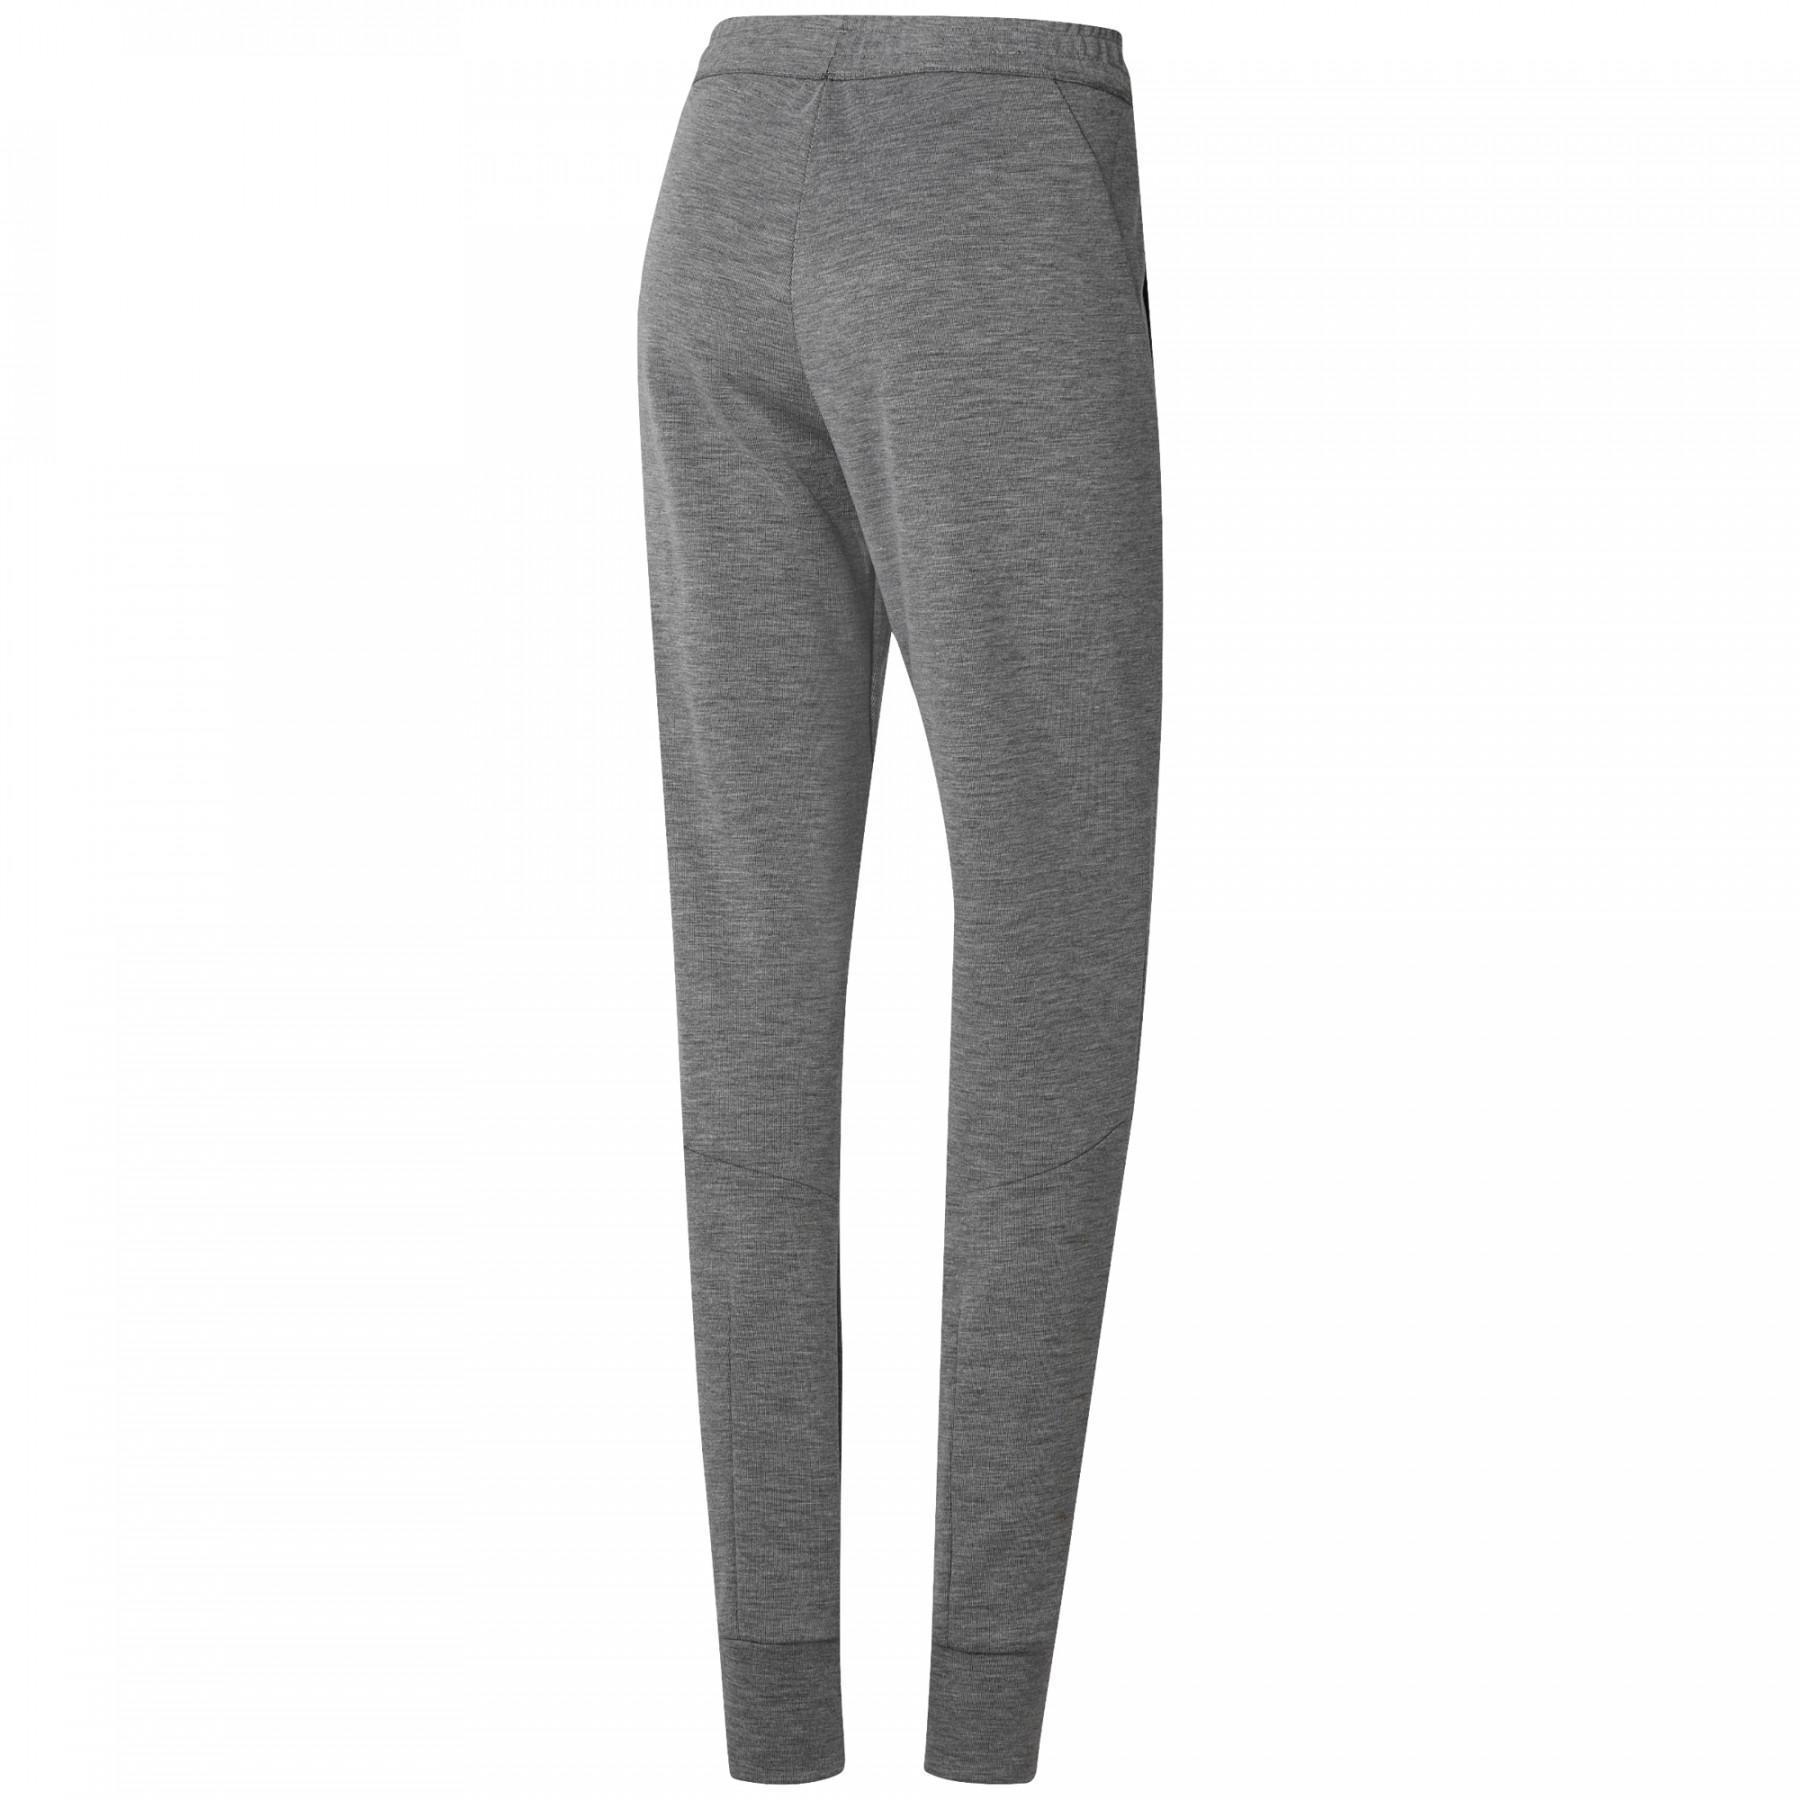 Women's knitted trousers Reebok Training Supply